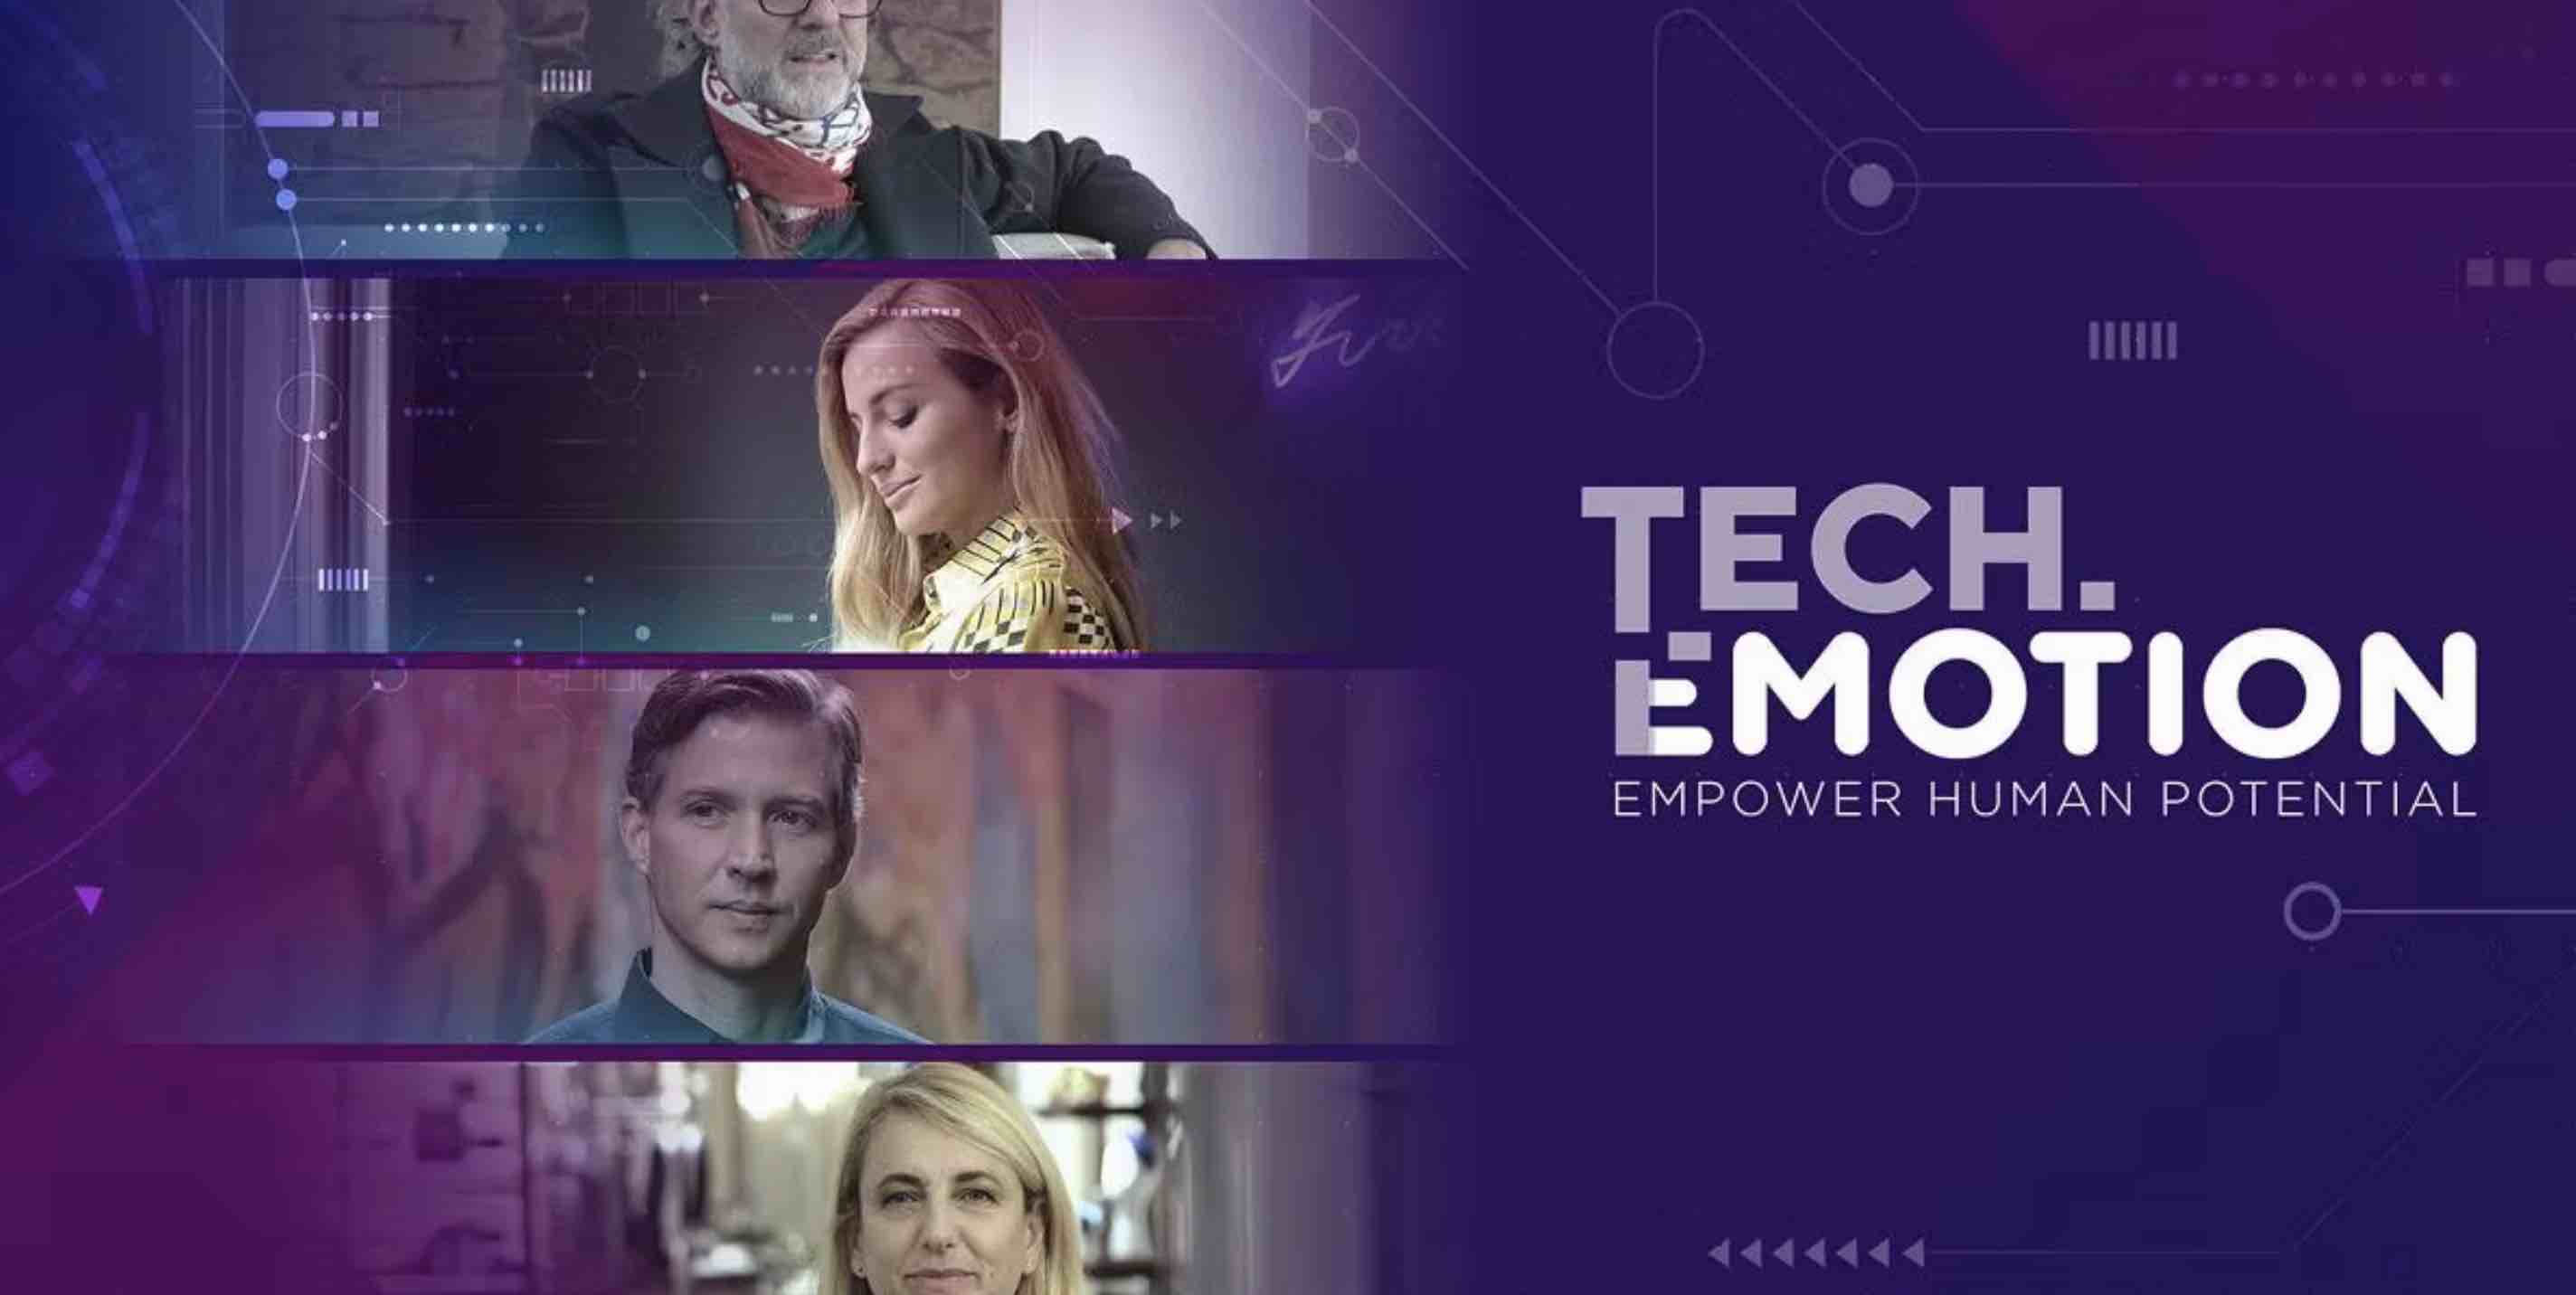 TECH.EMOTION - Empower Human Potential